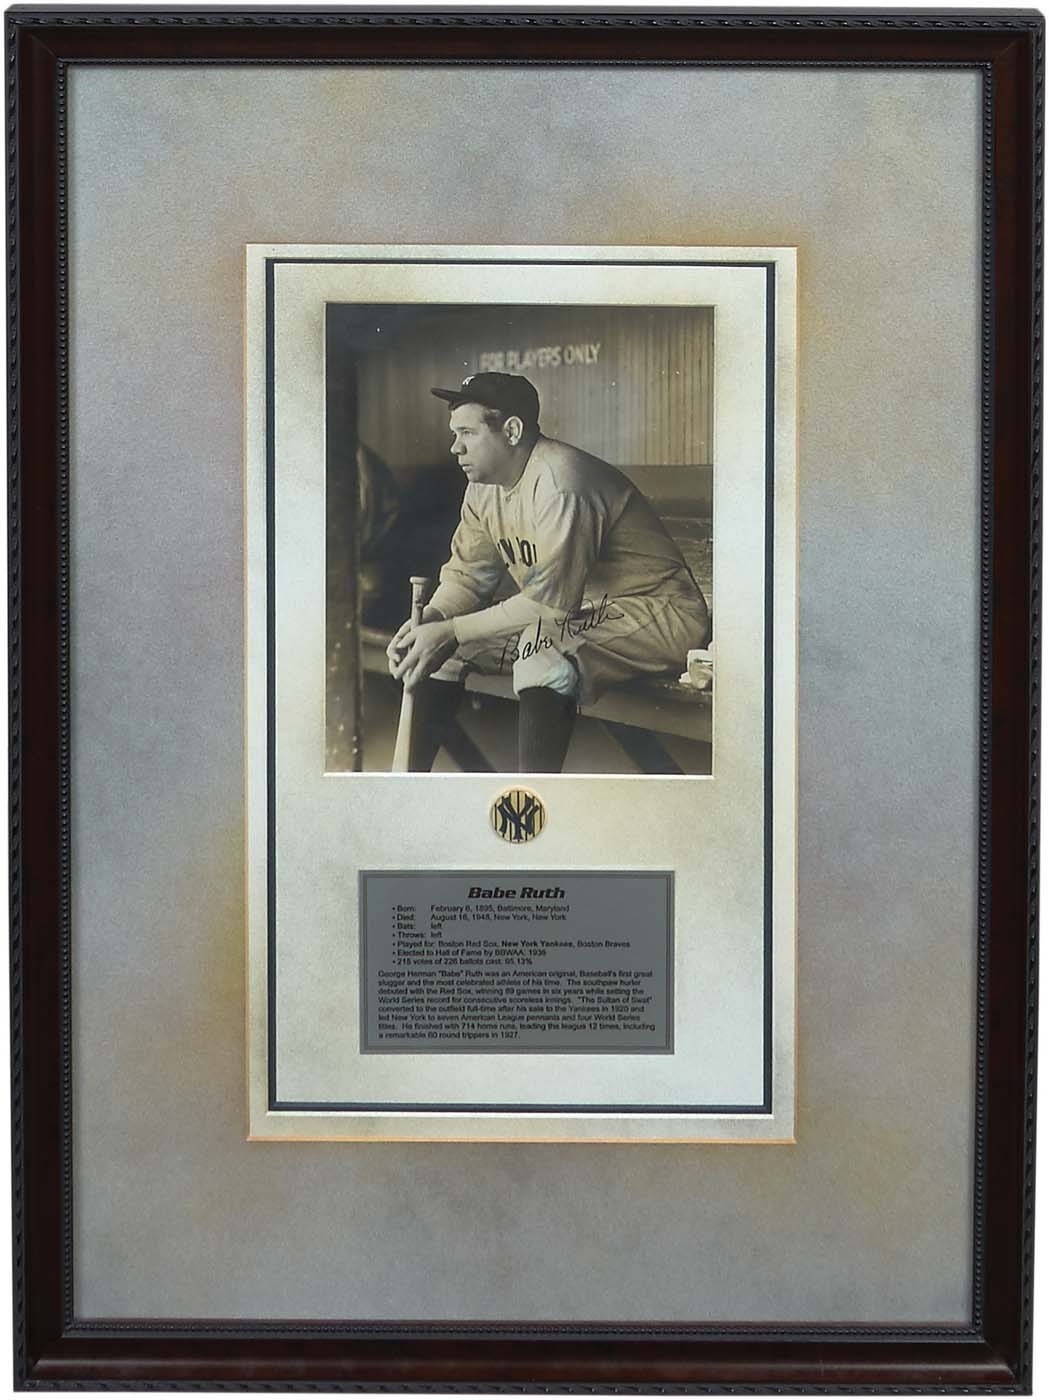 Babe Ruth Signed Photograph Display (PSA MINT 9)